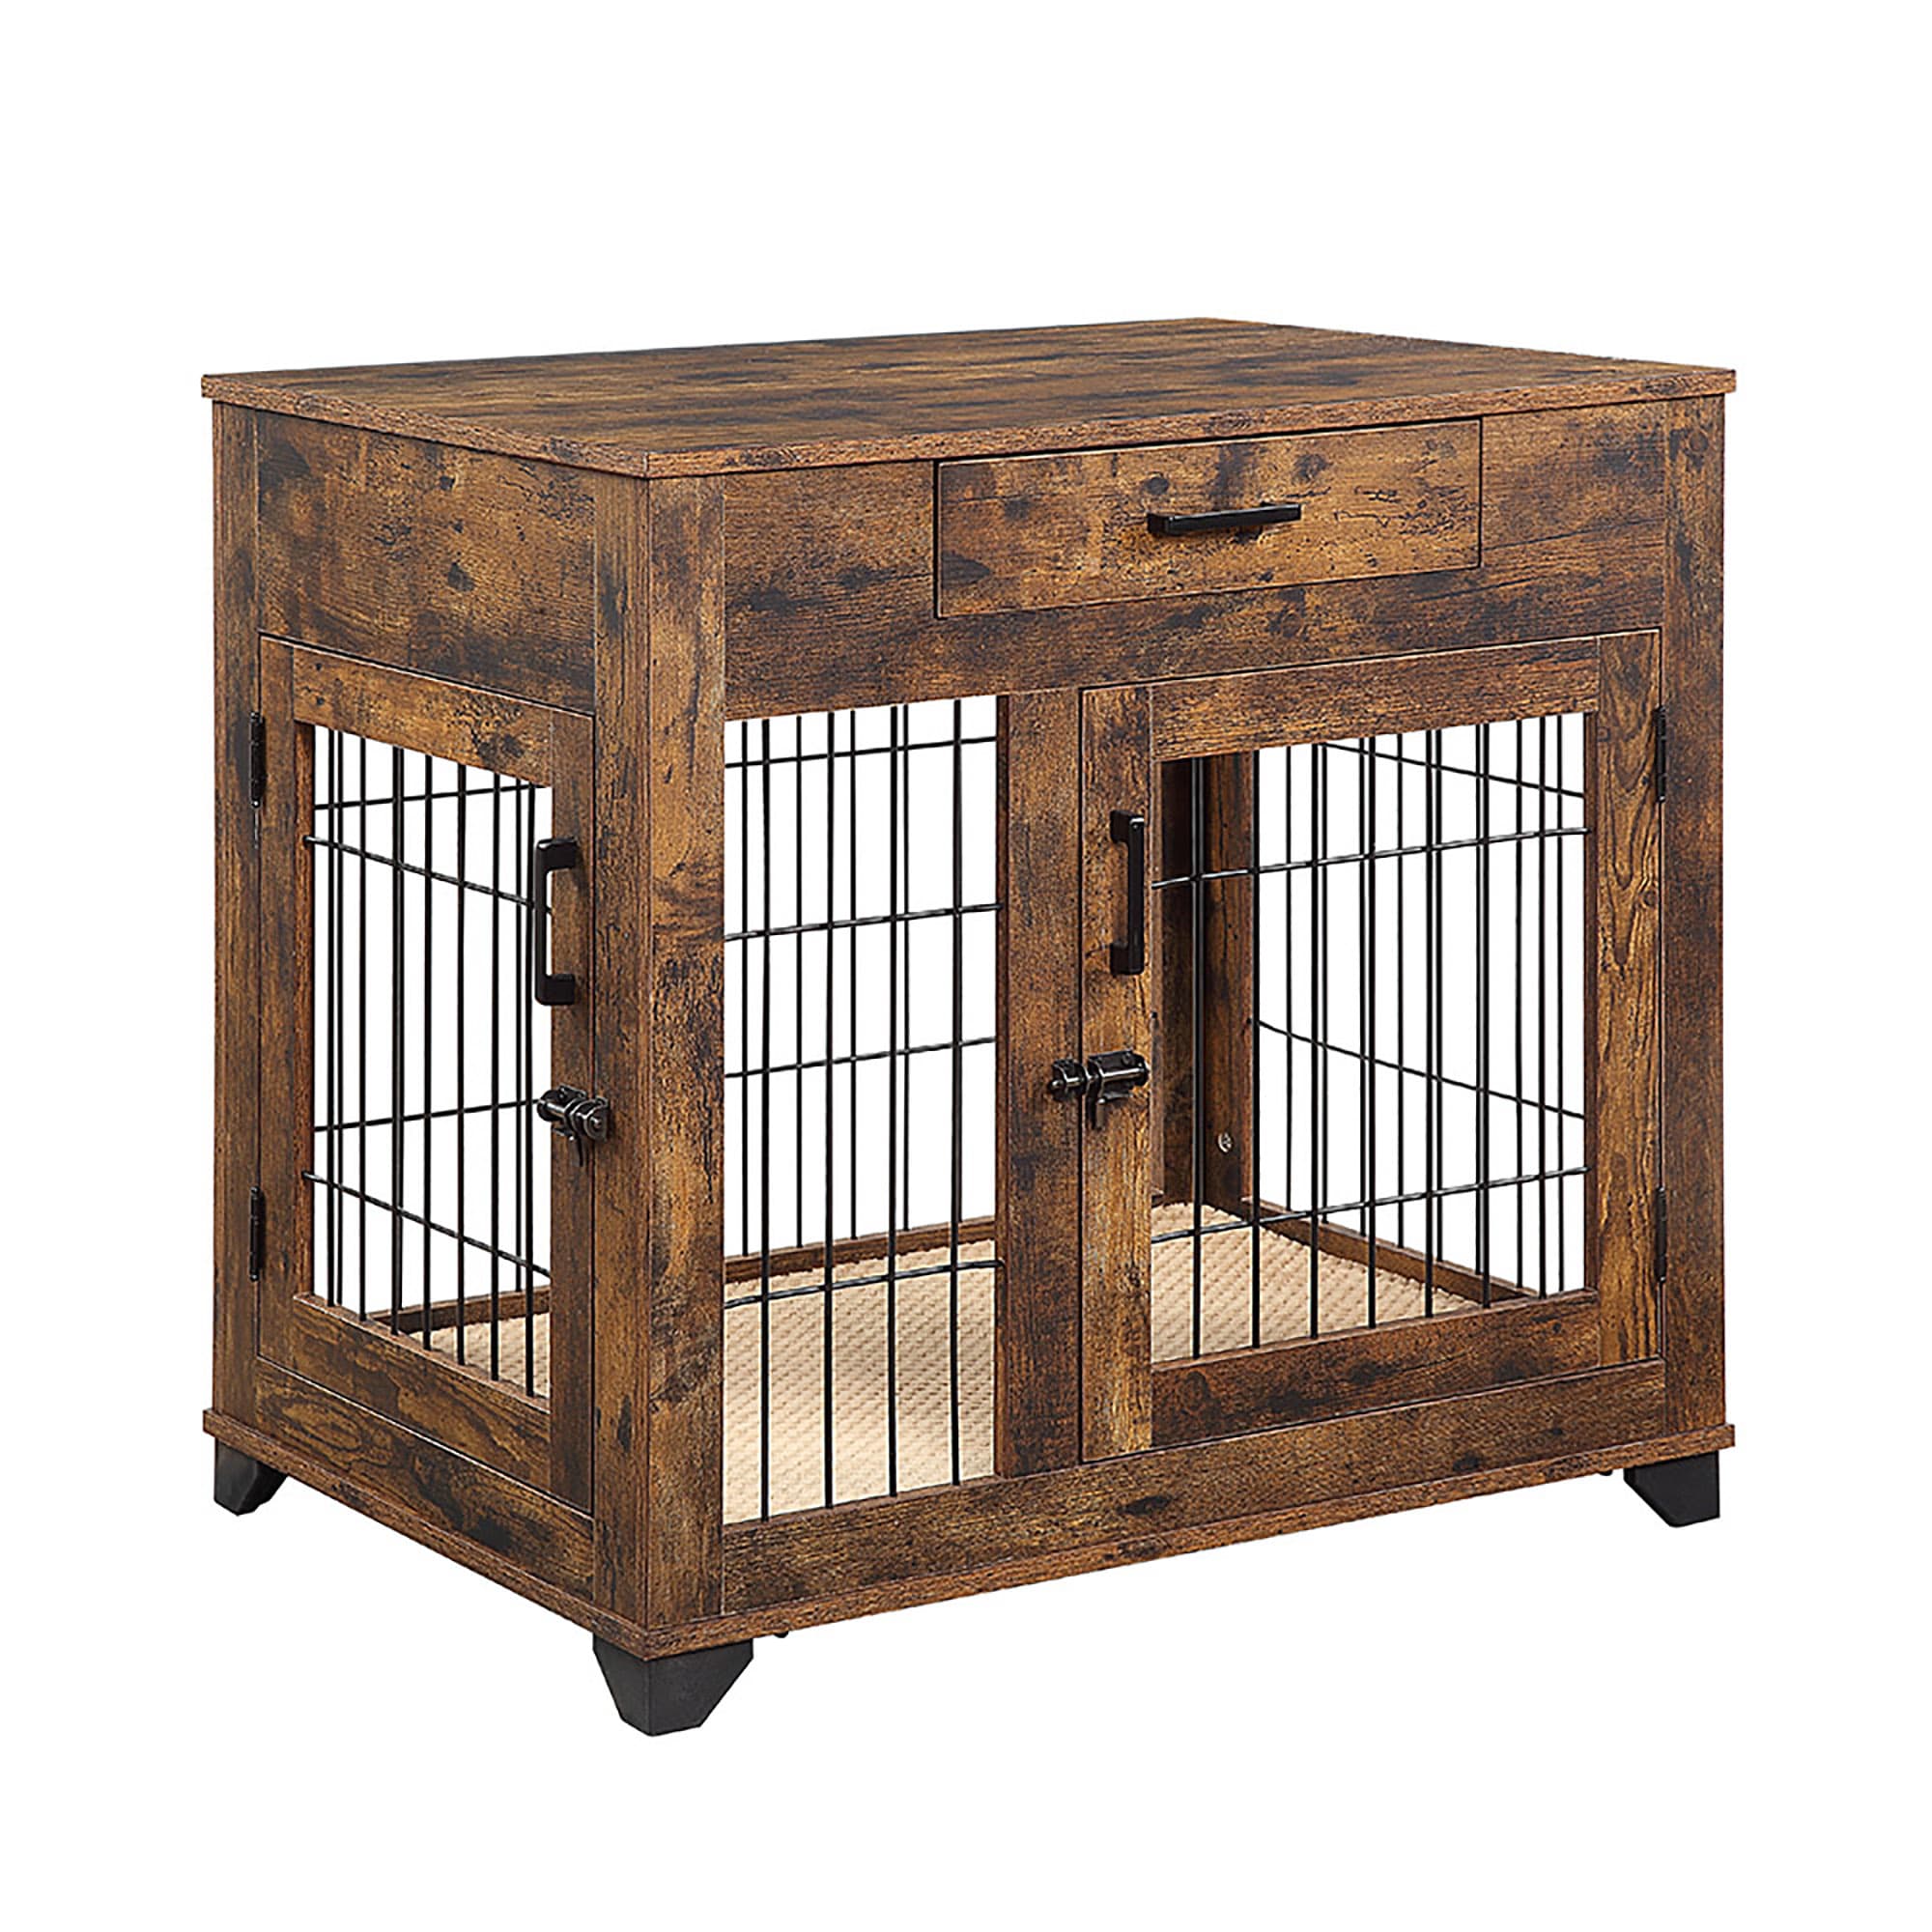 Medium and Large Crate Indoor Use Modern Design Dog House unipaws Pet Crate End Table with Cushion Wooden Wire Dog Kennels with Double Doors Chew-Proof 